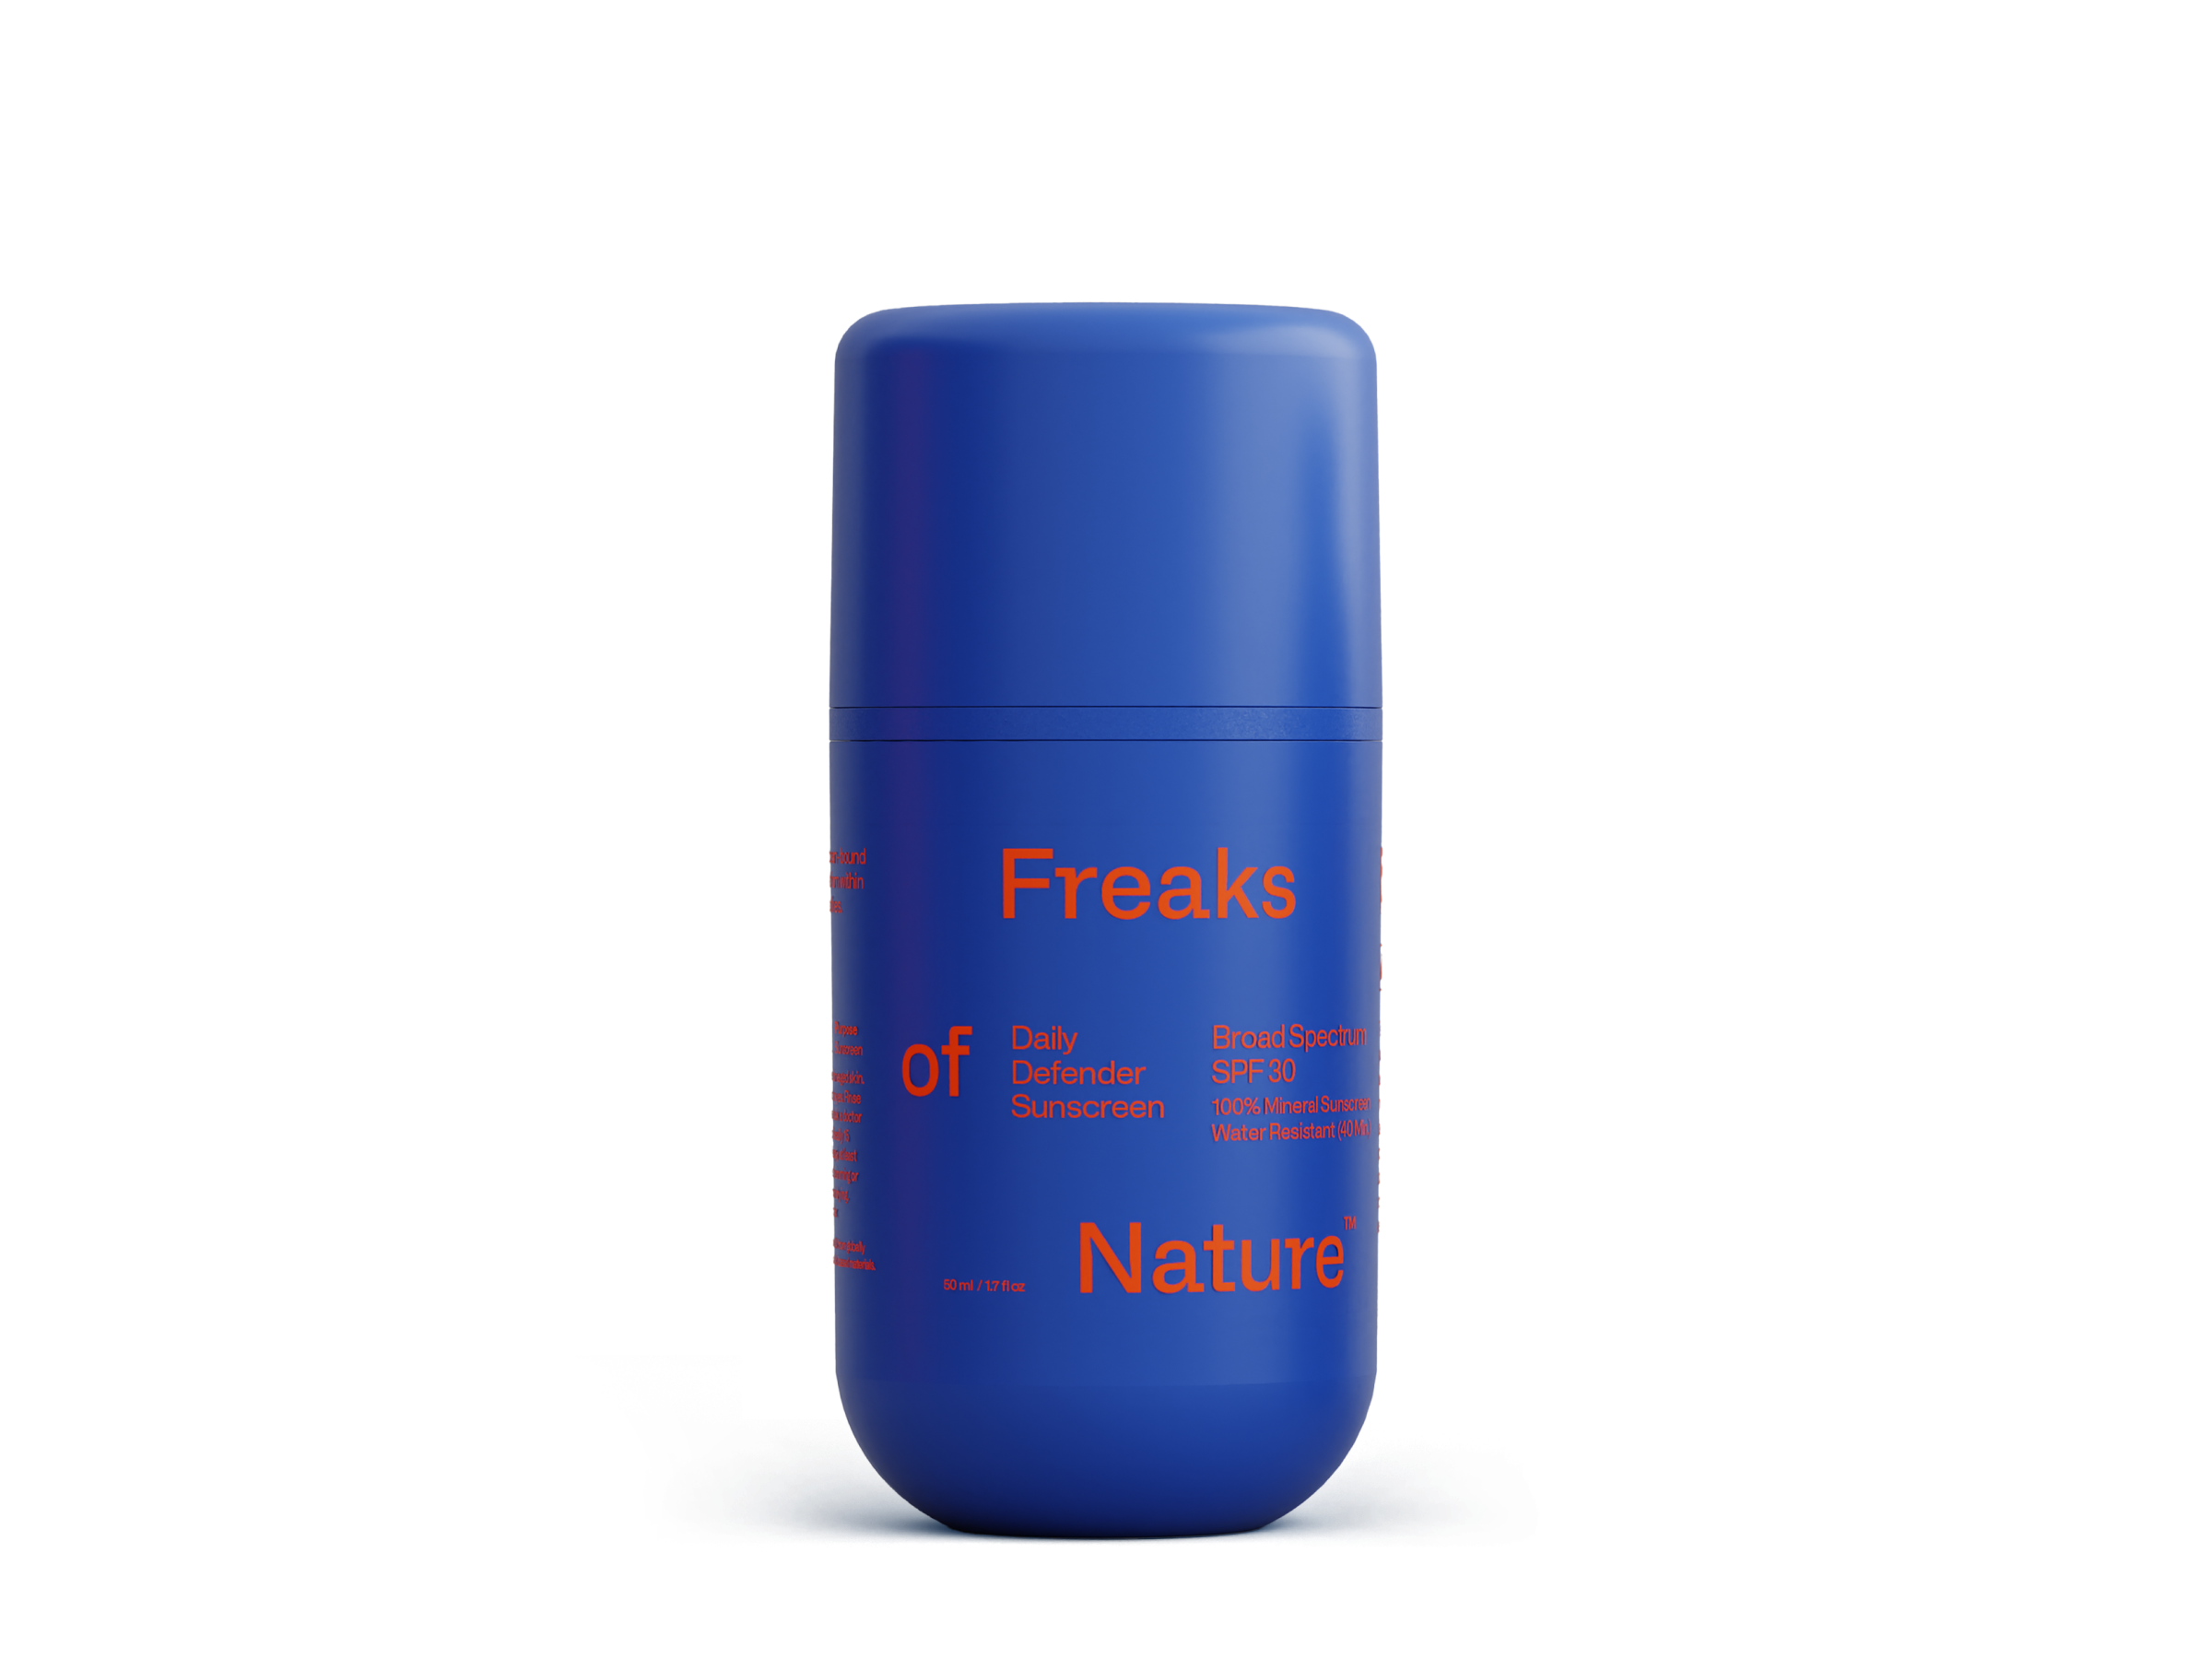 A blue cylindrical container of Freaks of Nature Skincare Daily Defender SPF30. The product label features orange text and includes details like "Broad Spectrum SPF 50" and "with Moisturizer." Infused with non-nano zinc for extra protection.